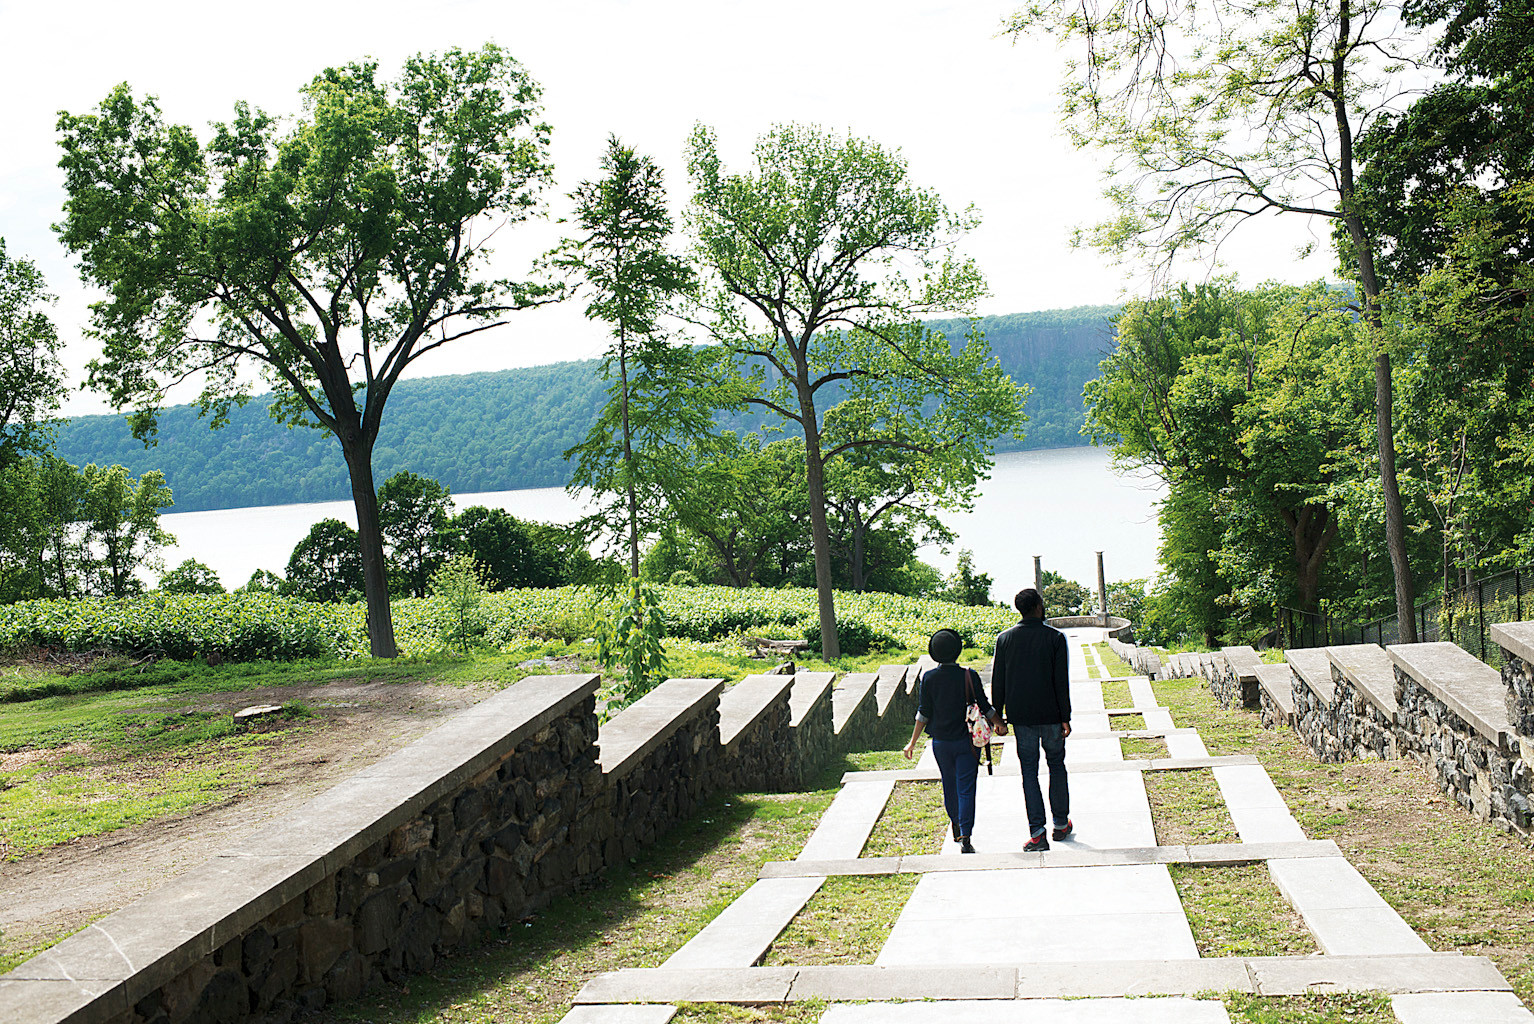 A young couple takes the stairs leading to a viewing platform called the Overlook, offering views of the Hudson River and Palisades.